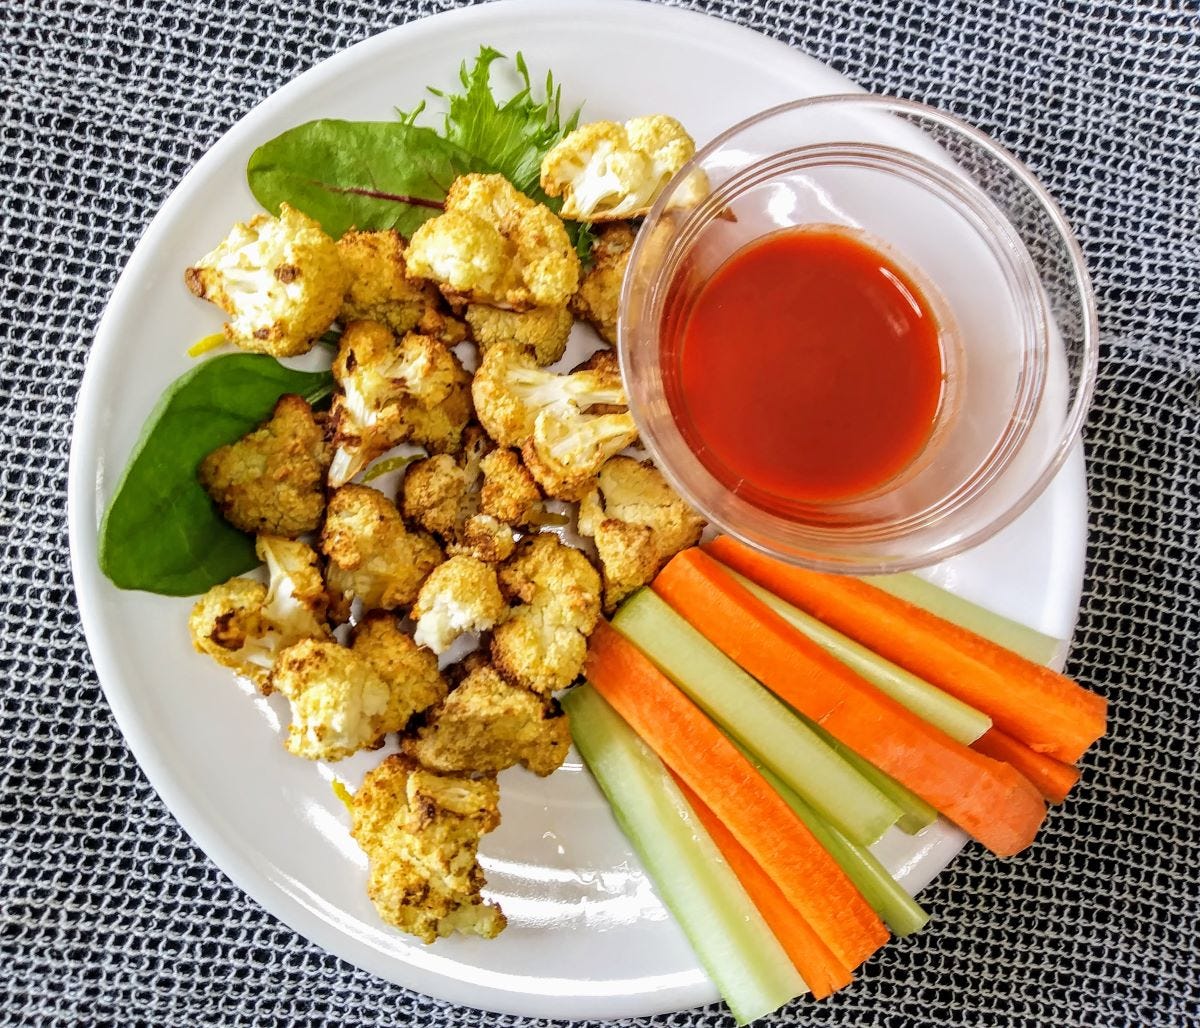 baked crispy cauliflower bites on plate with carrot and celery sticks and hot sauce.